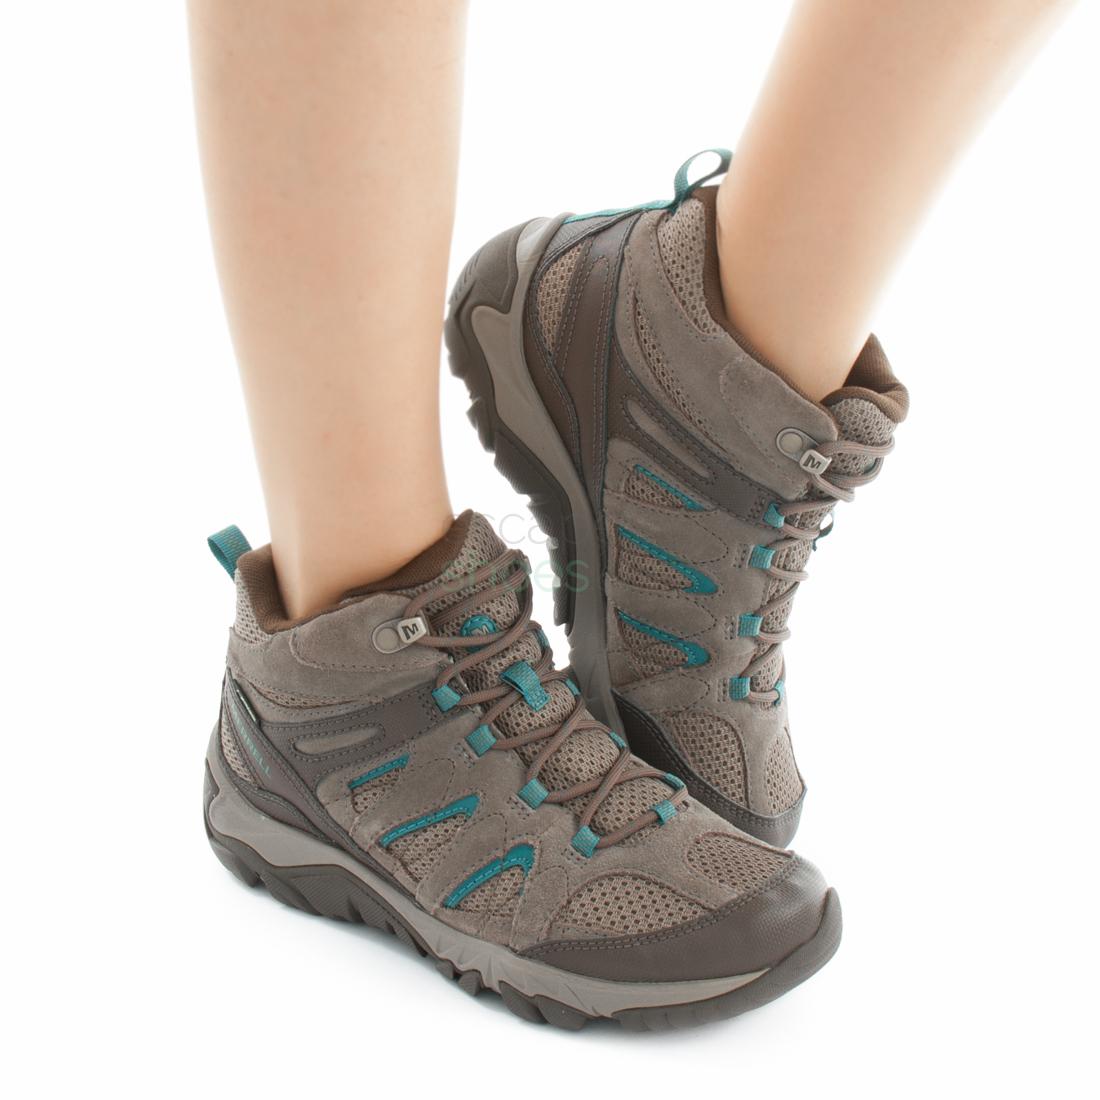 merrell outmost ventilator ladies walking shoes